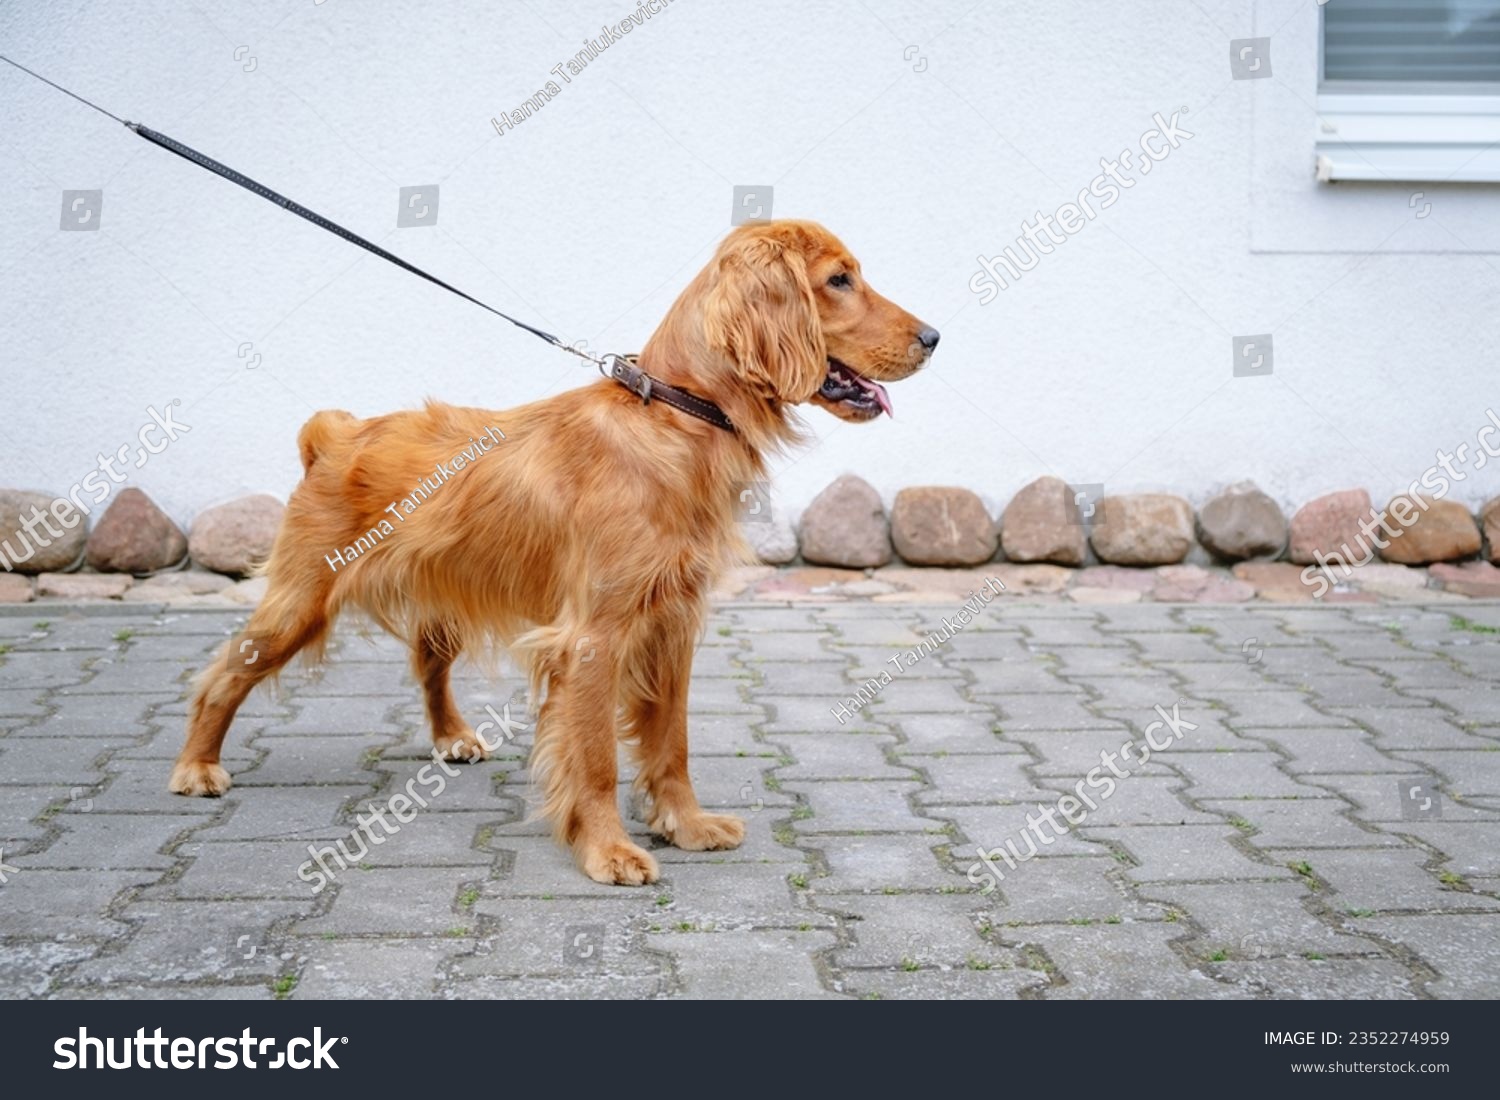 Portrait of a standing brown english cocker spaniel. A beautiful brown haired dog. Adorable pet on a walk. Walking outdoors. Young purebred animal. Open mouth with pink tongue. On a leash. Copy space. #2352274959